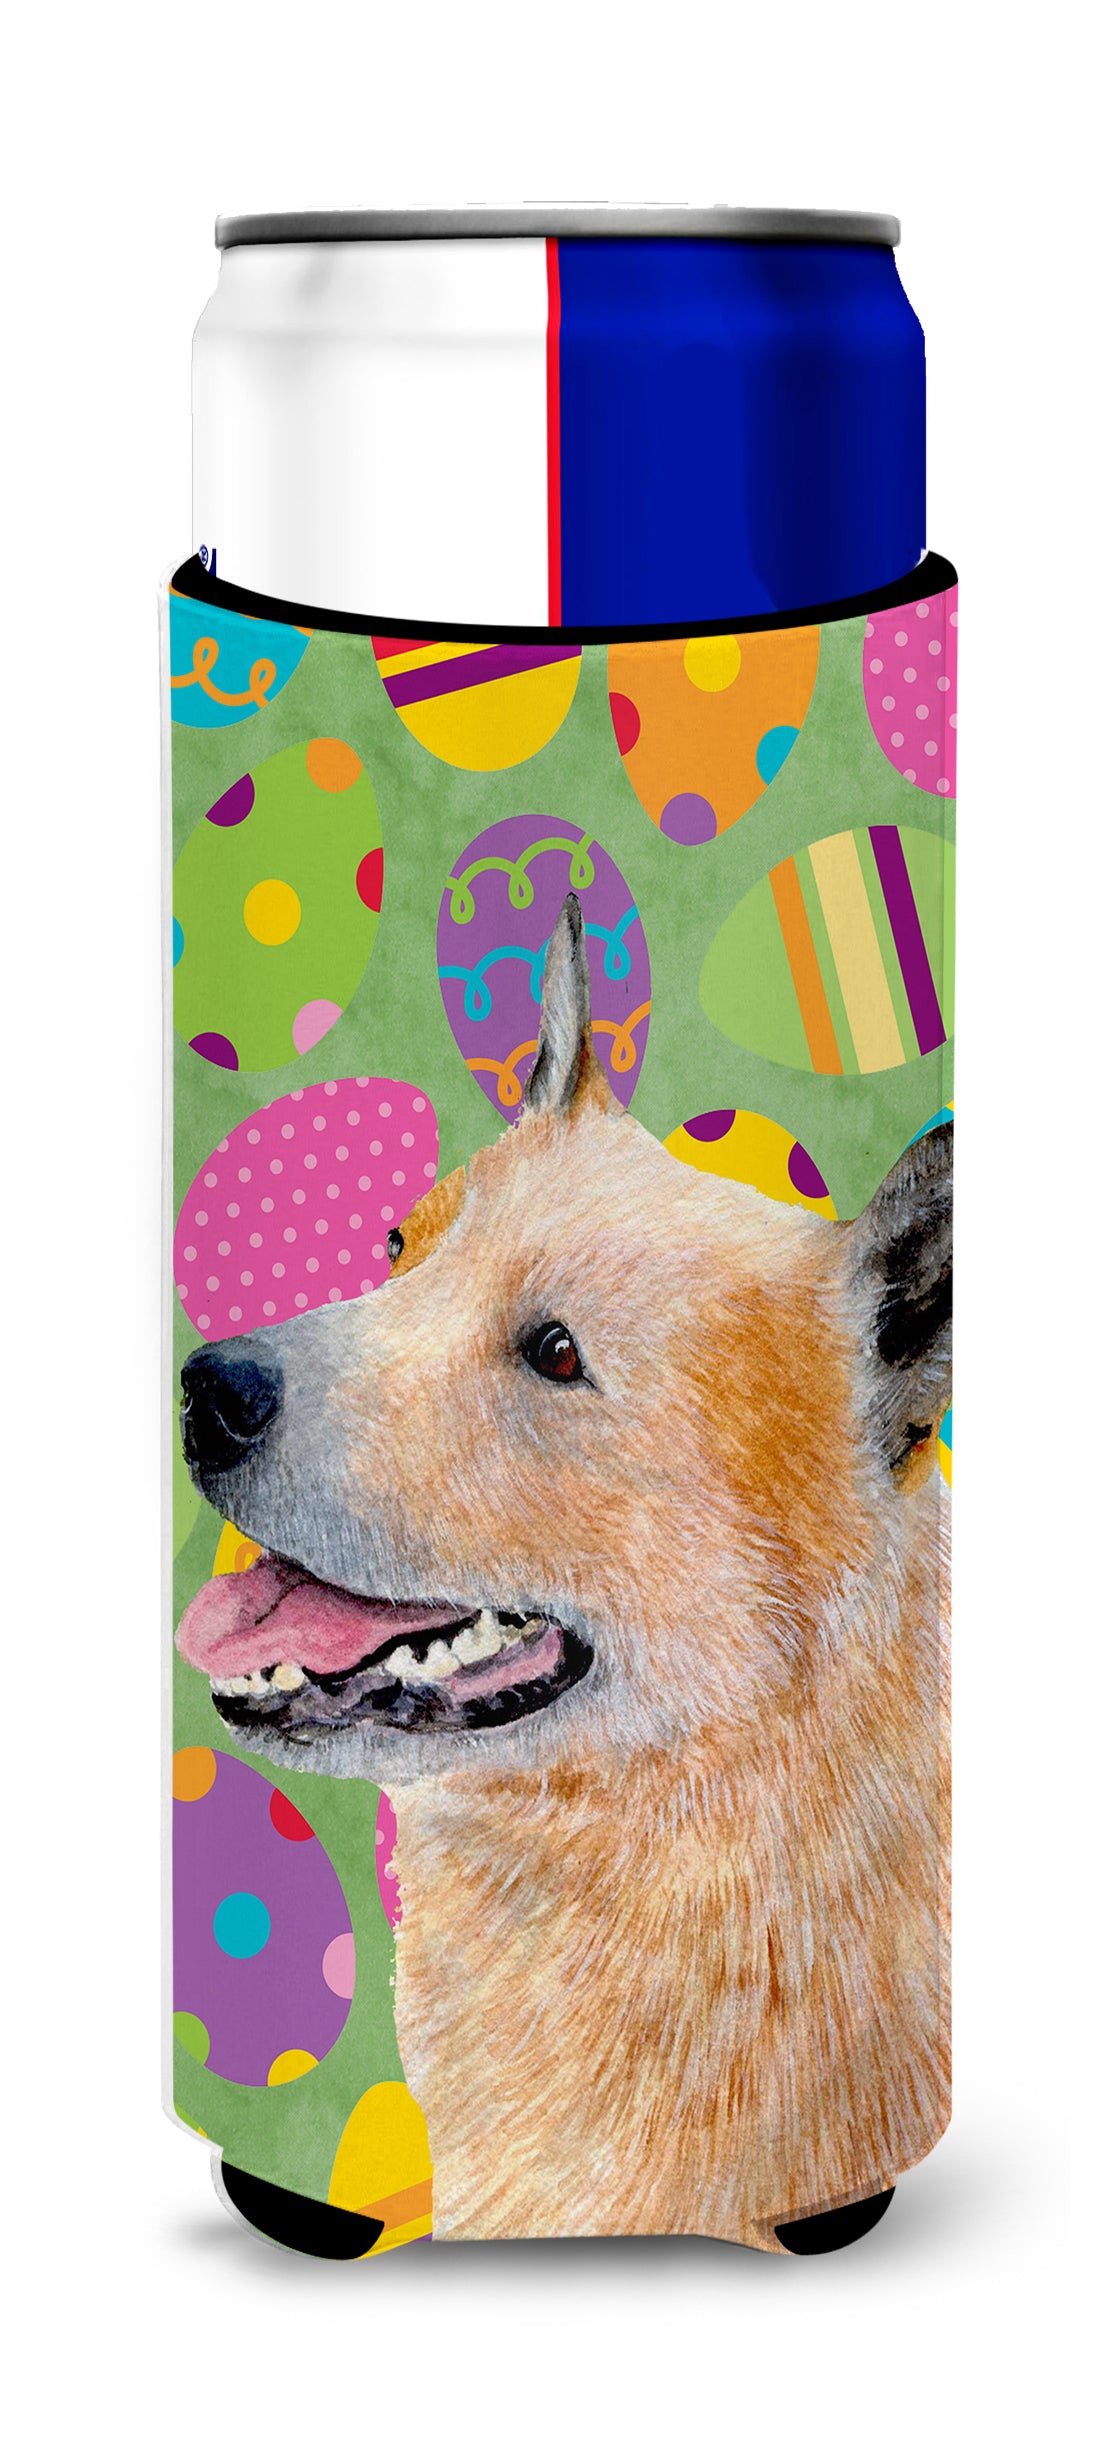 Australian Cattle Dog Easter Eggtravaganza Ultra Beverage Insulators for slim cans LH9407MUK.